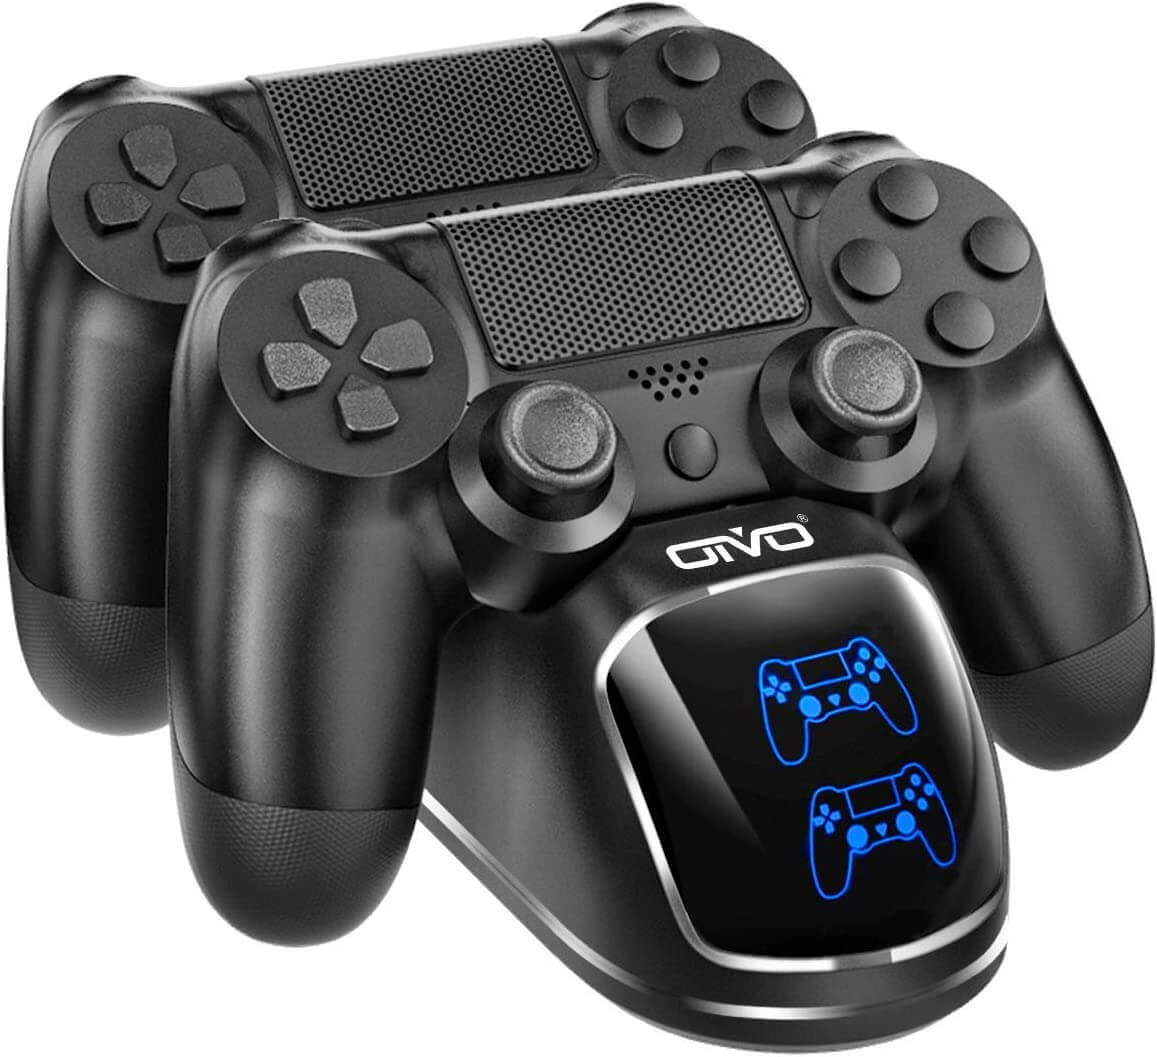 PS4 Controller Charger, OIVO Controller Charging Dock Station for Playstation 4 Controller, Dual Controller Charger Station for PS4